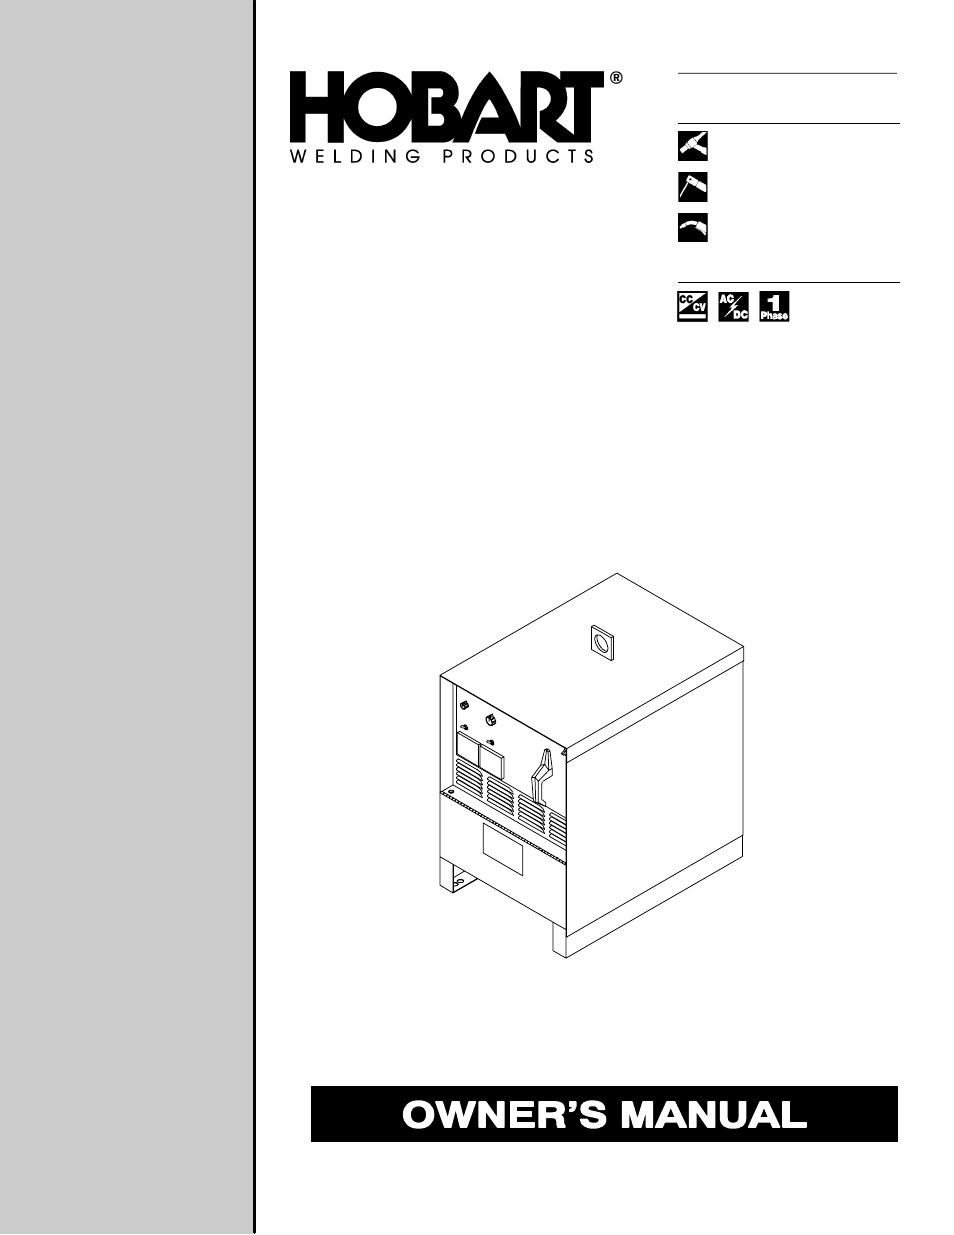 Hobart Welding Products 300 DC User Manual | 32 pages